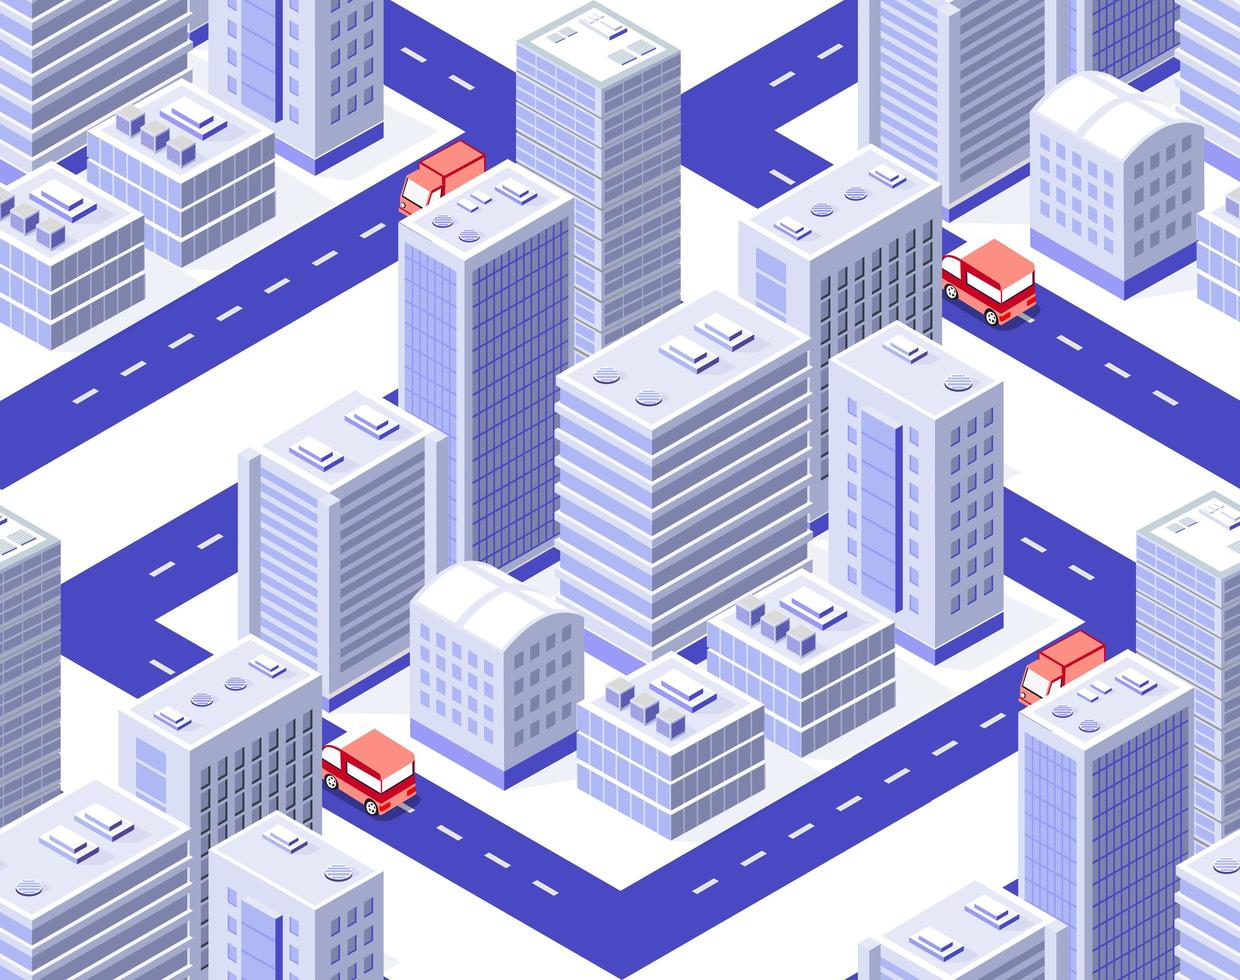 Seamless repeating pattern city isometric architecture business vector